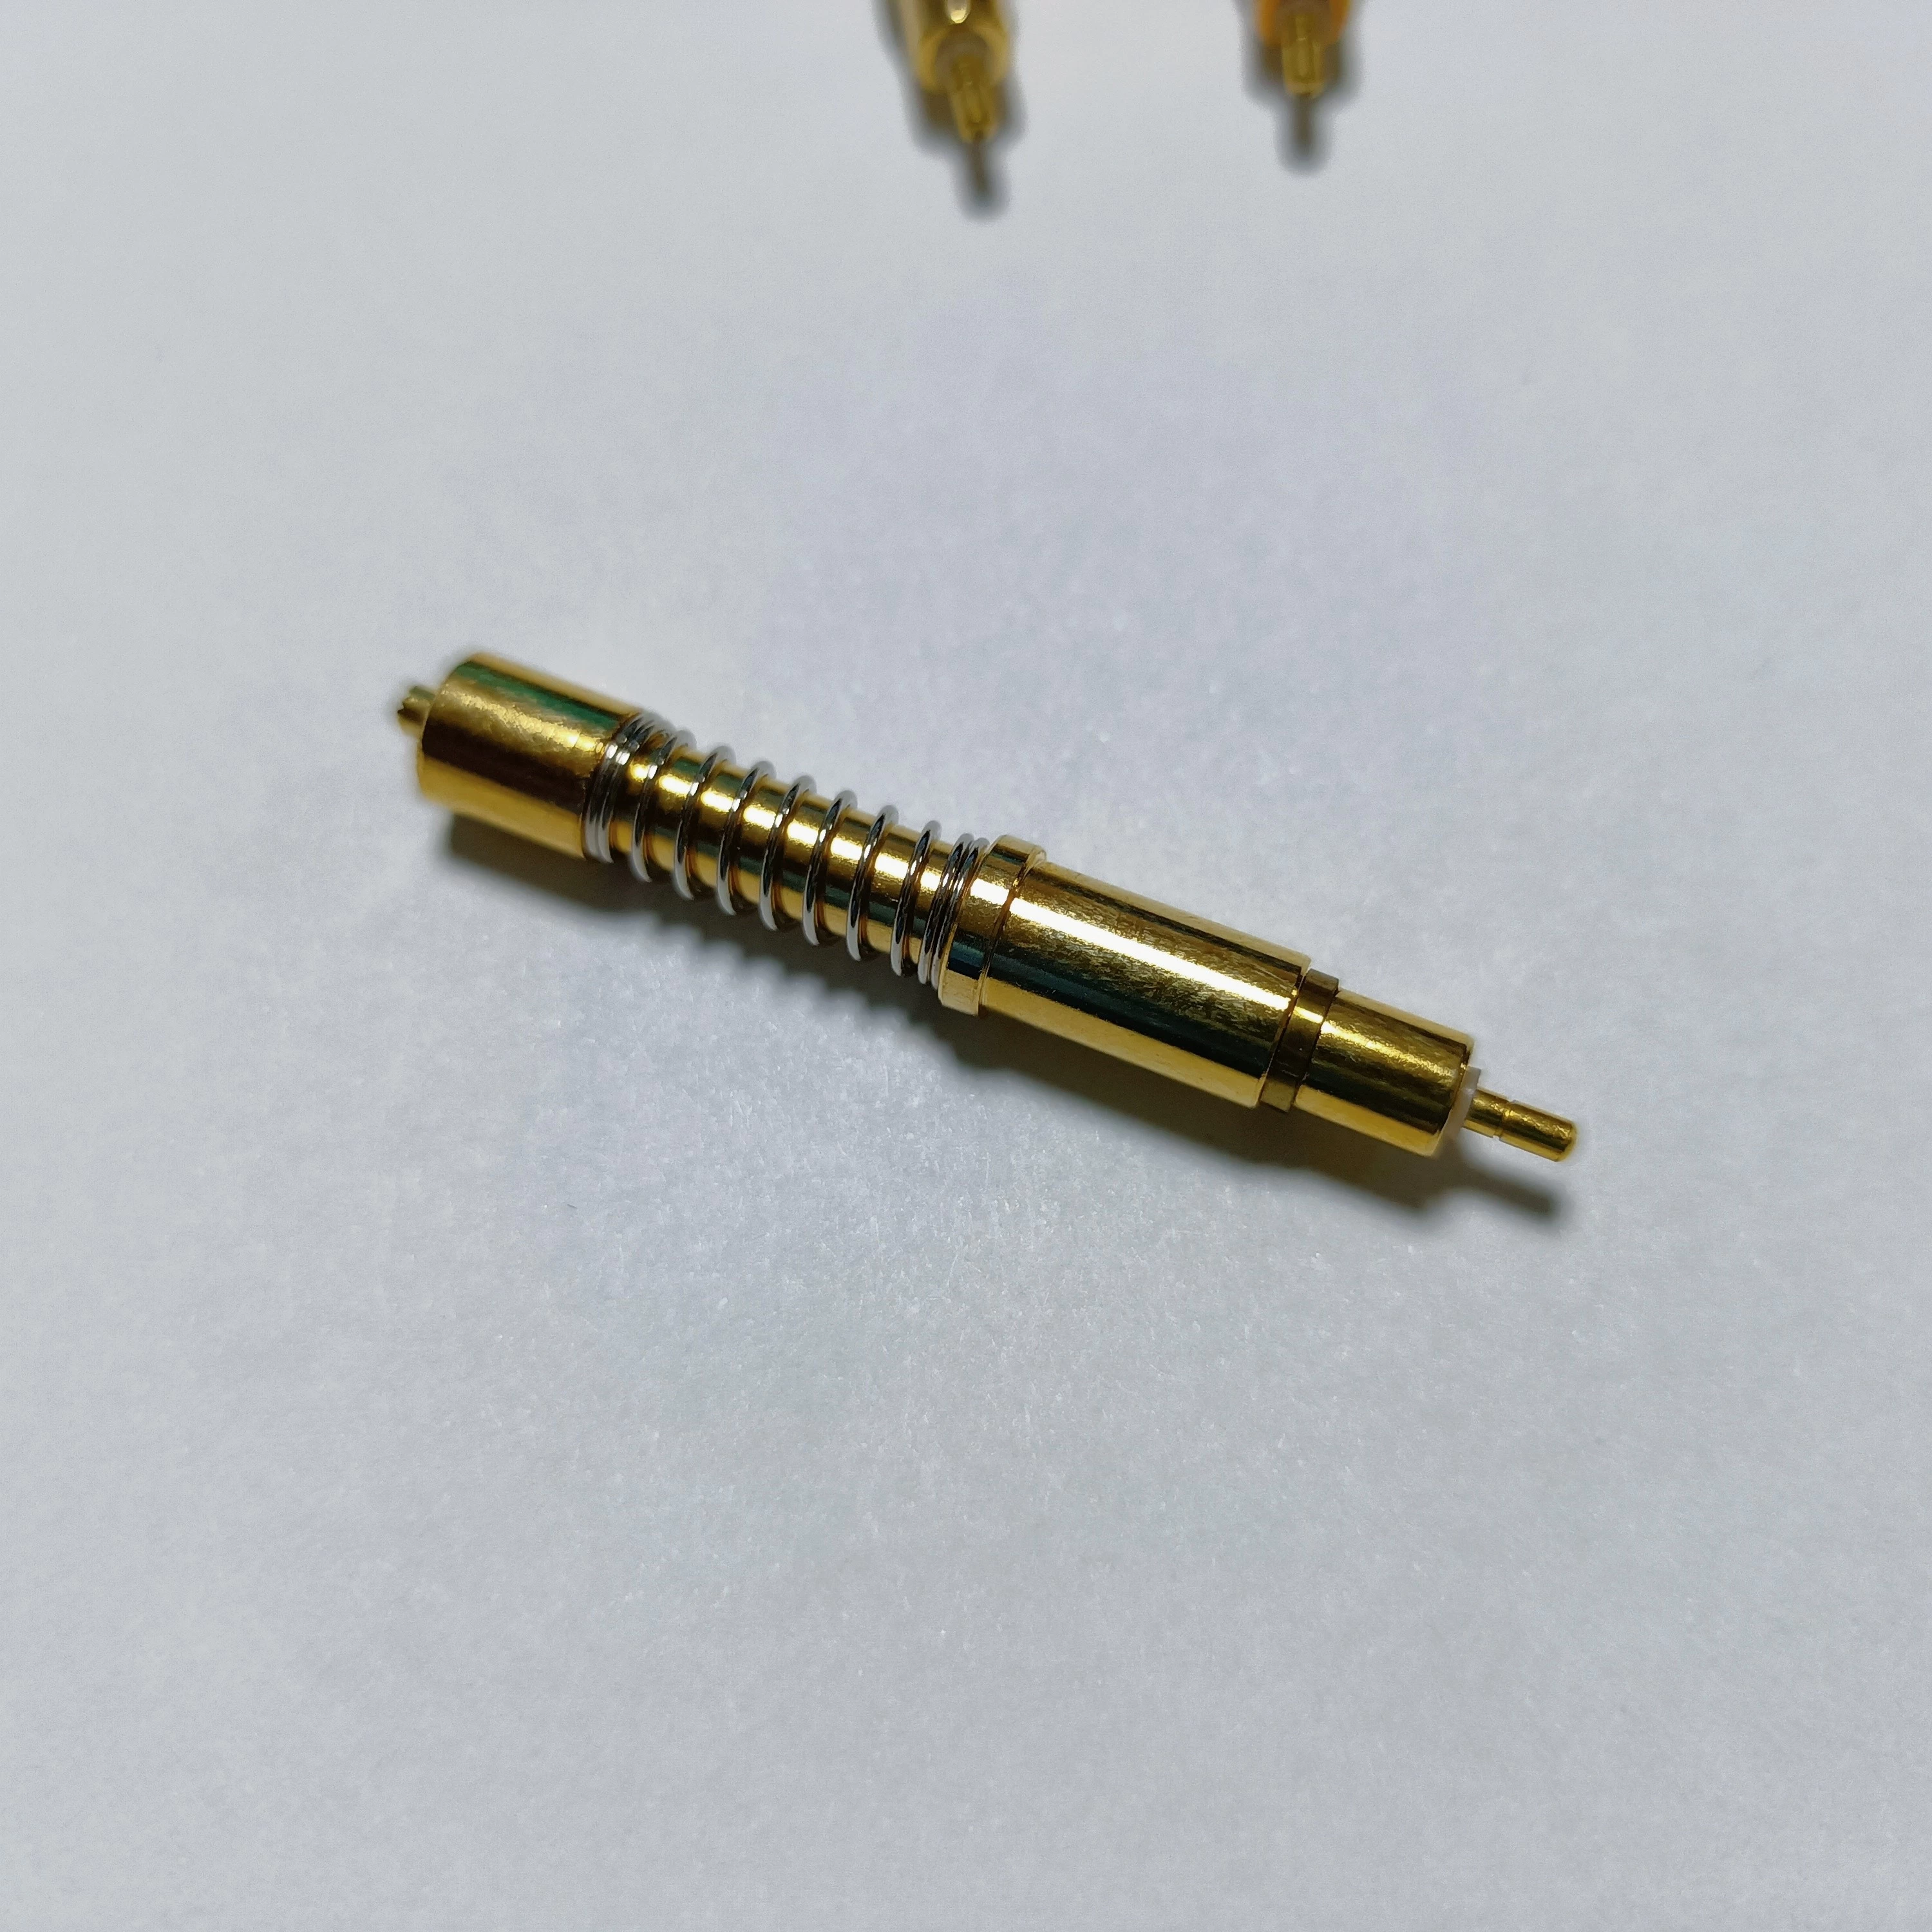 Low Price Items Spring Contact Pin SFENG Size 44.5mm